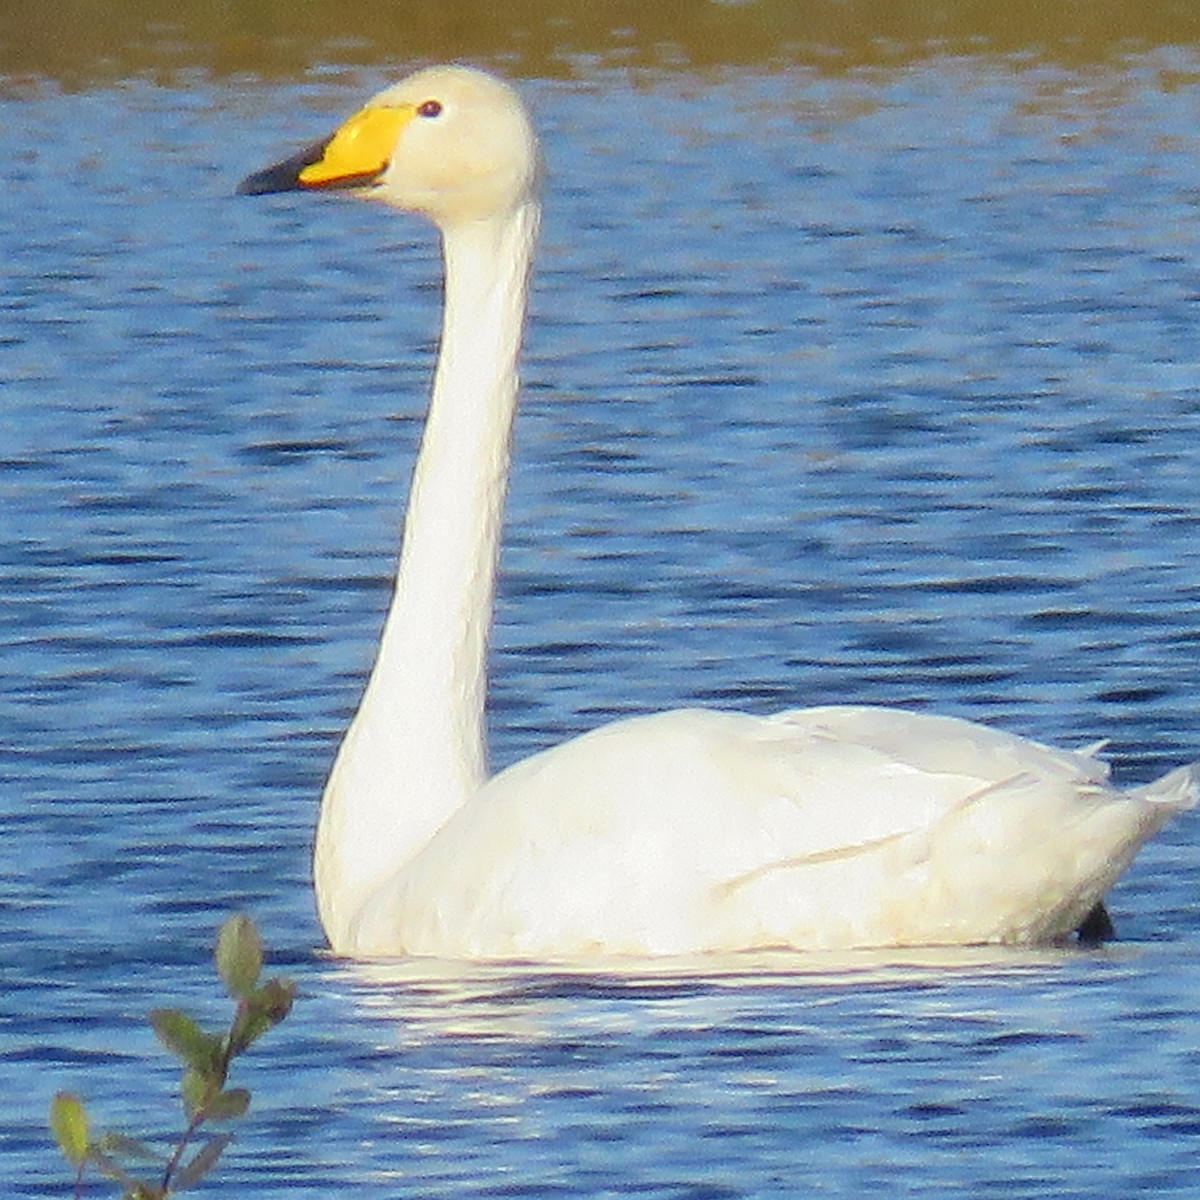 Whooper swan on Chat Moss, Irlam, UK